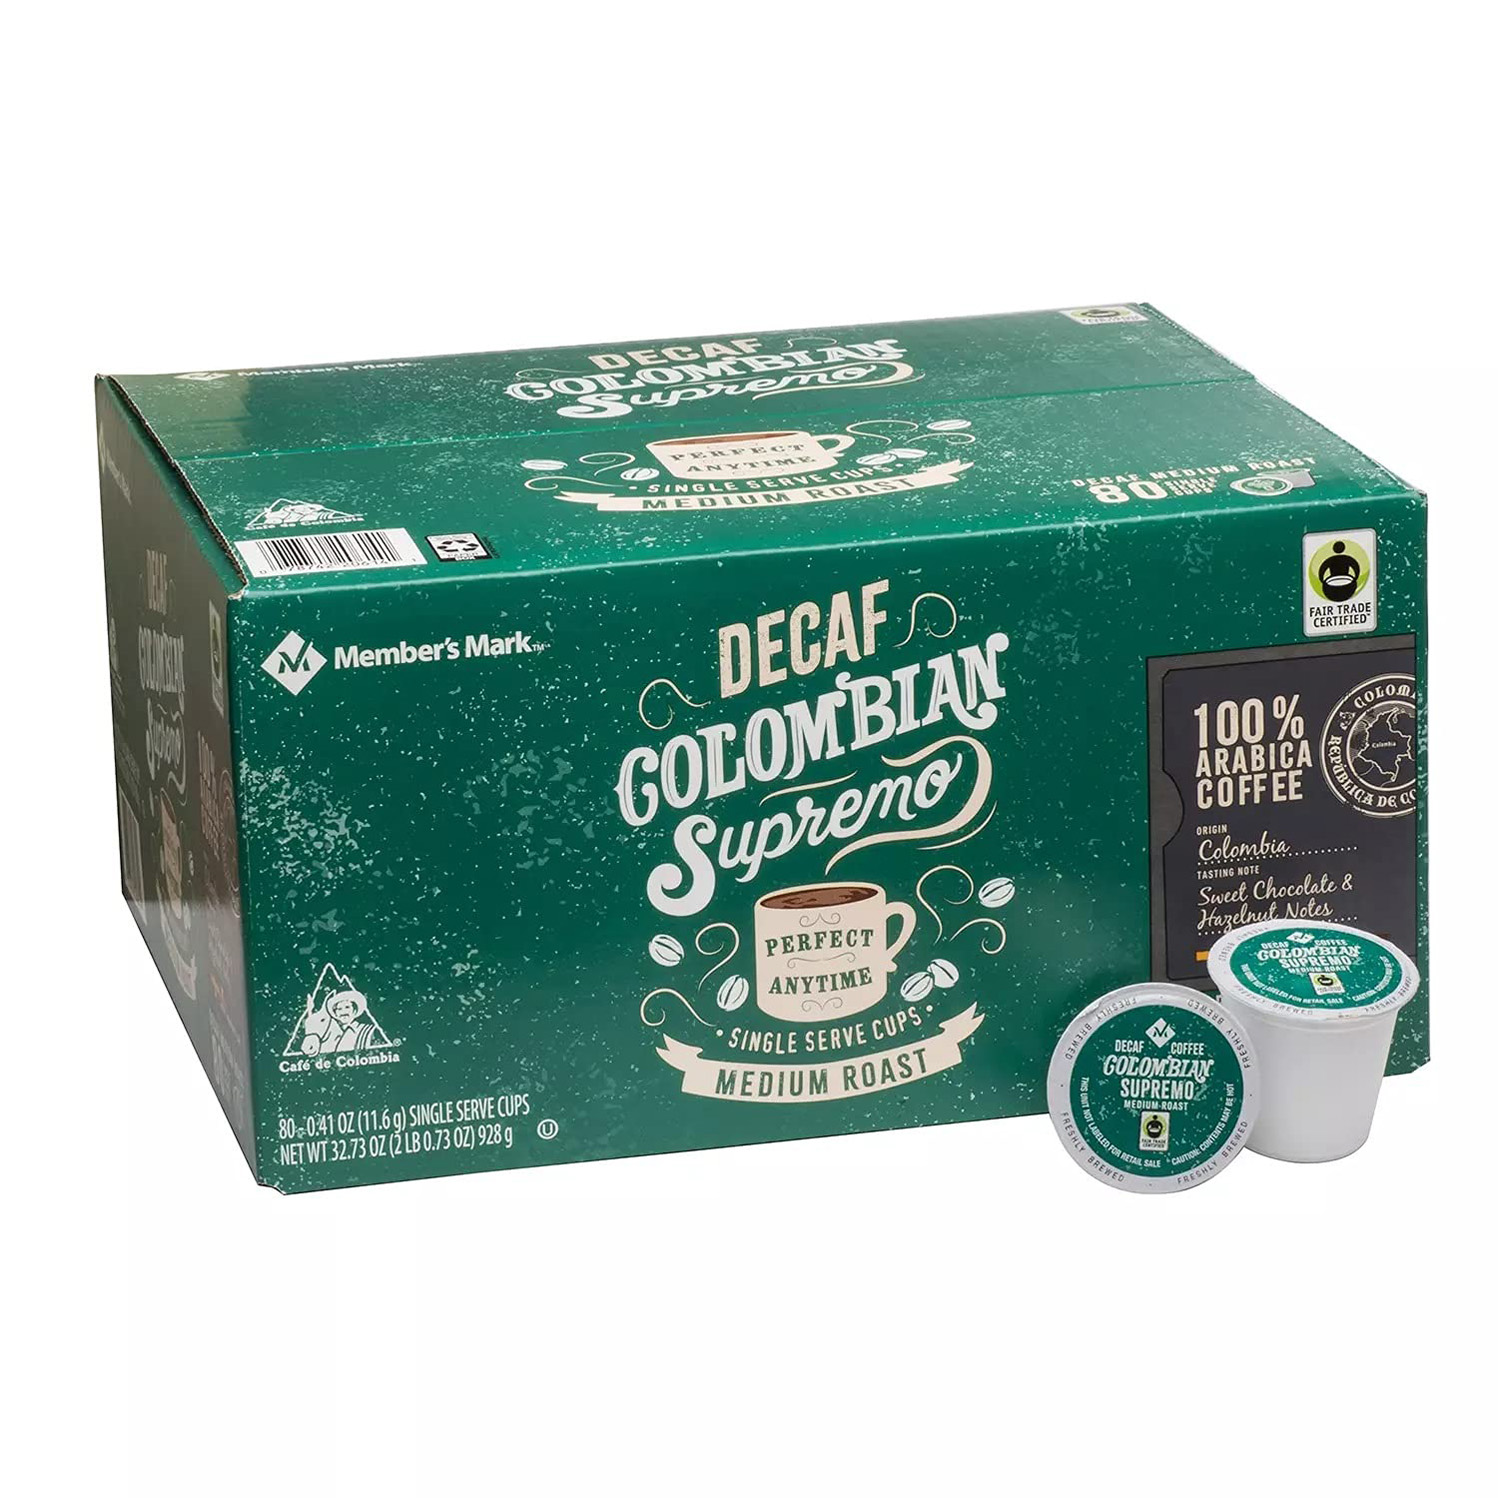 Member’s Mark Decaffeinated Colombian Coffee, Single-Serve Cups